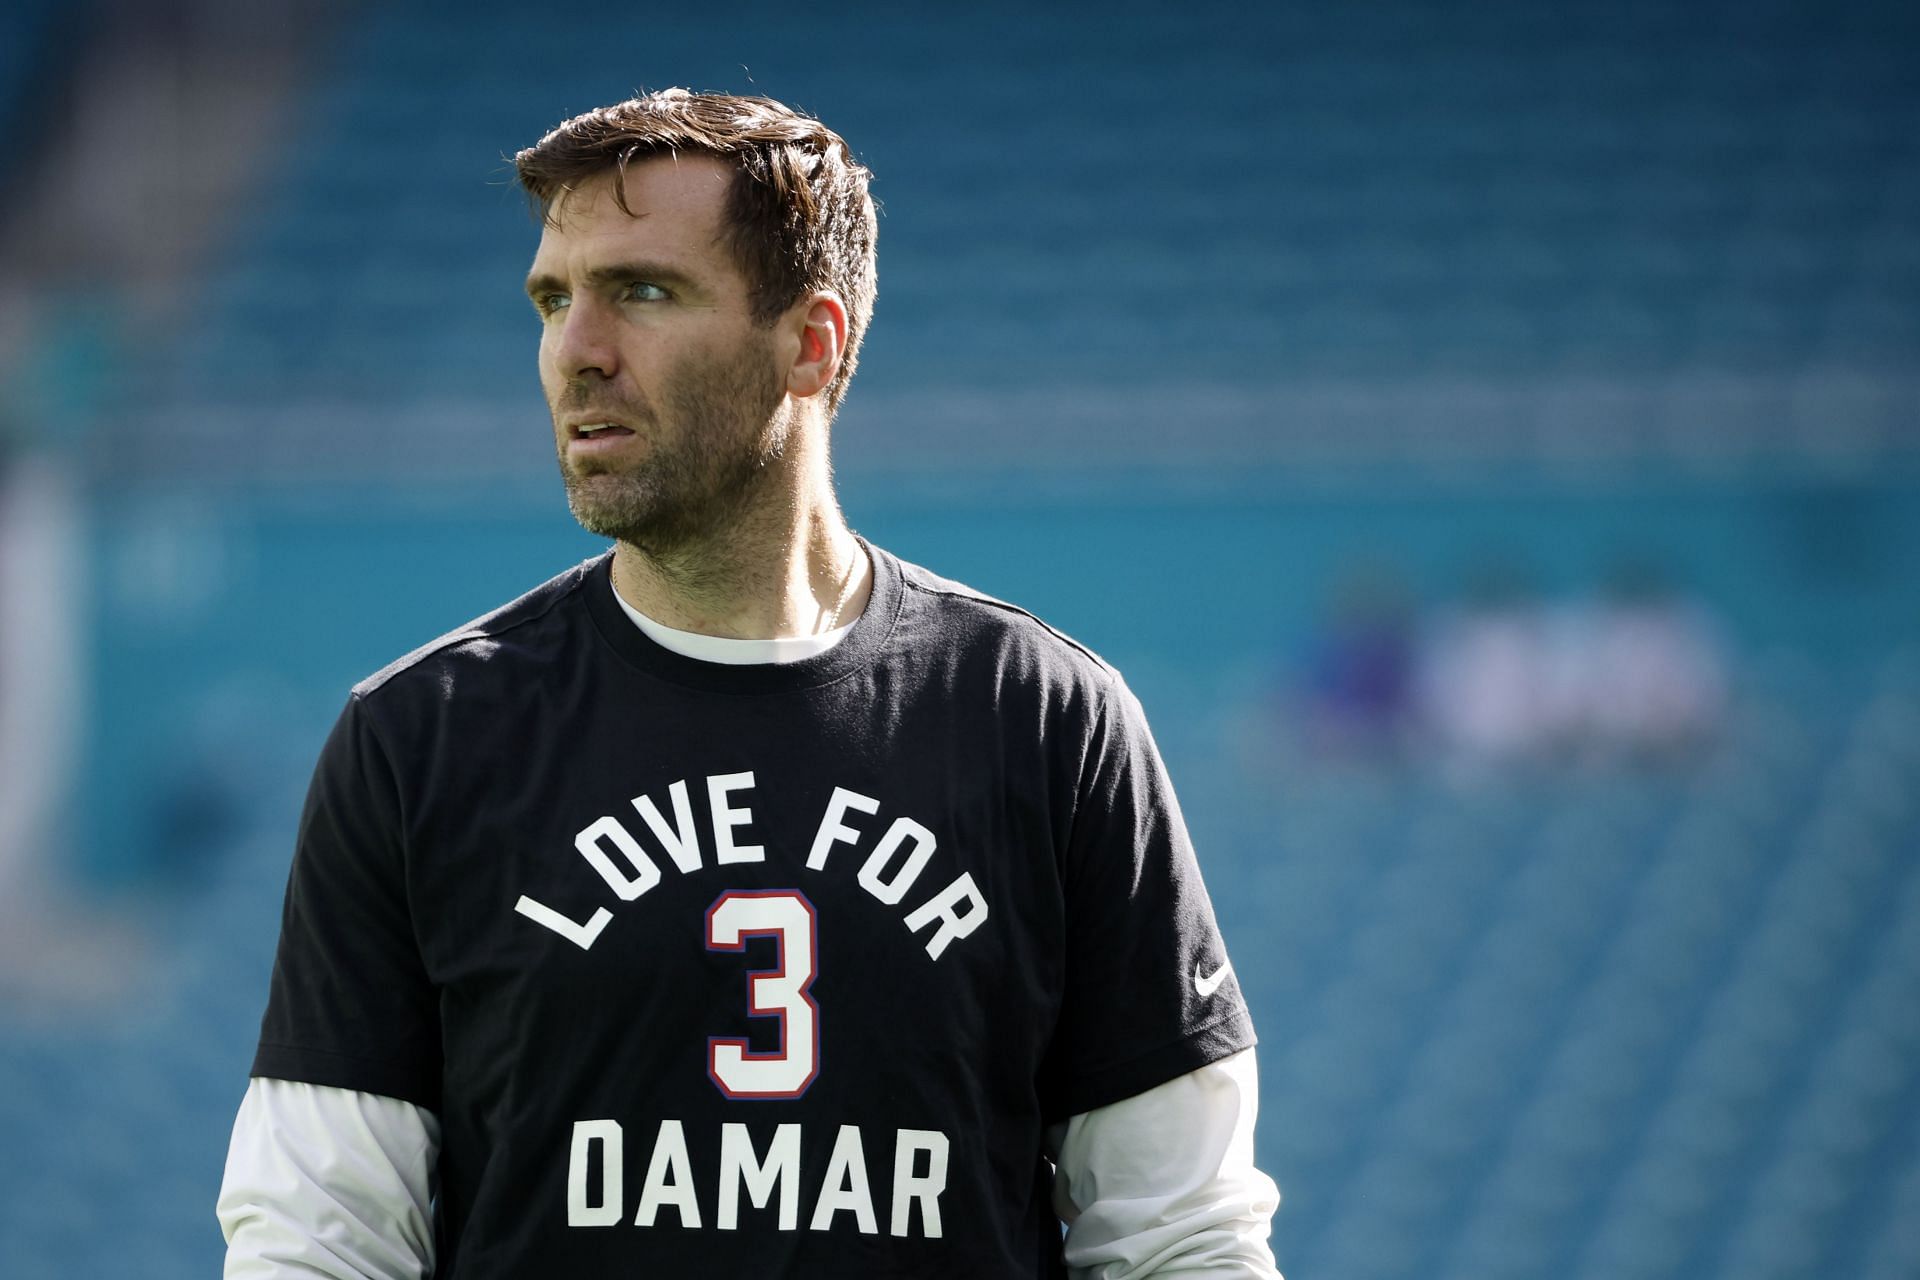 Quarterback Joe Flacco, #19 of the New York Jets, warms up before their game against the Miami Dolphins at Hard Rock Stadium on January 08, 2023, in Miami Gardens, Florida.